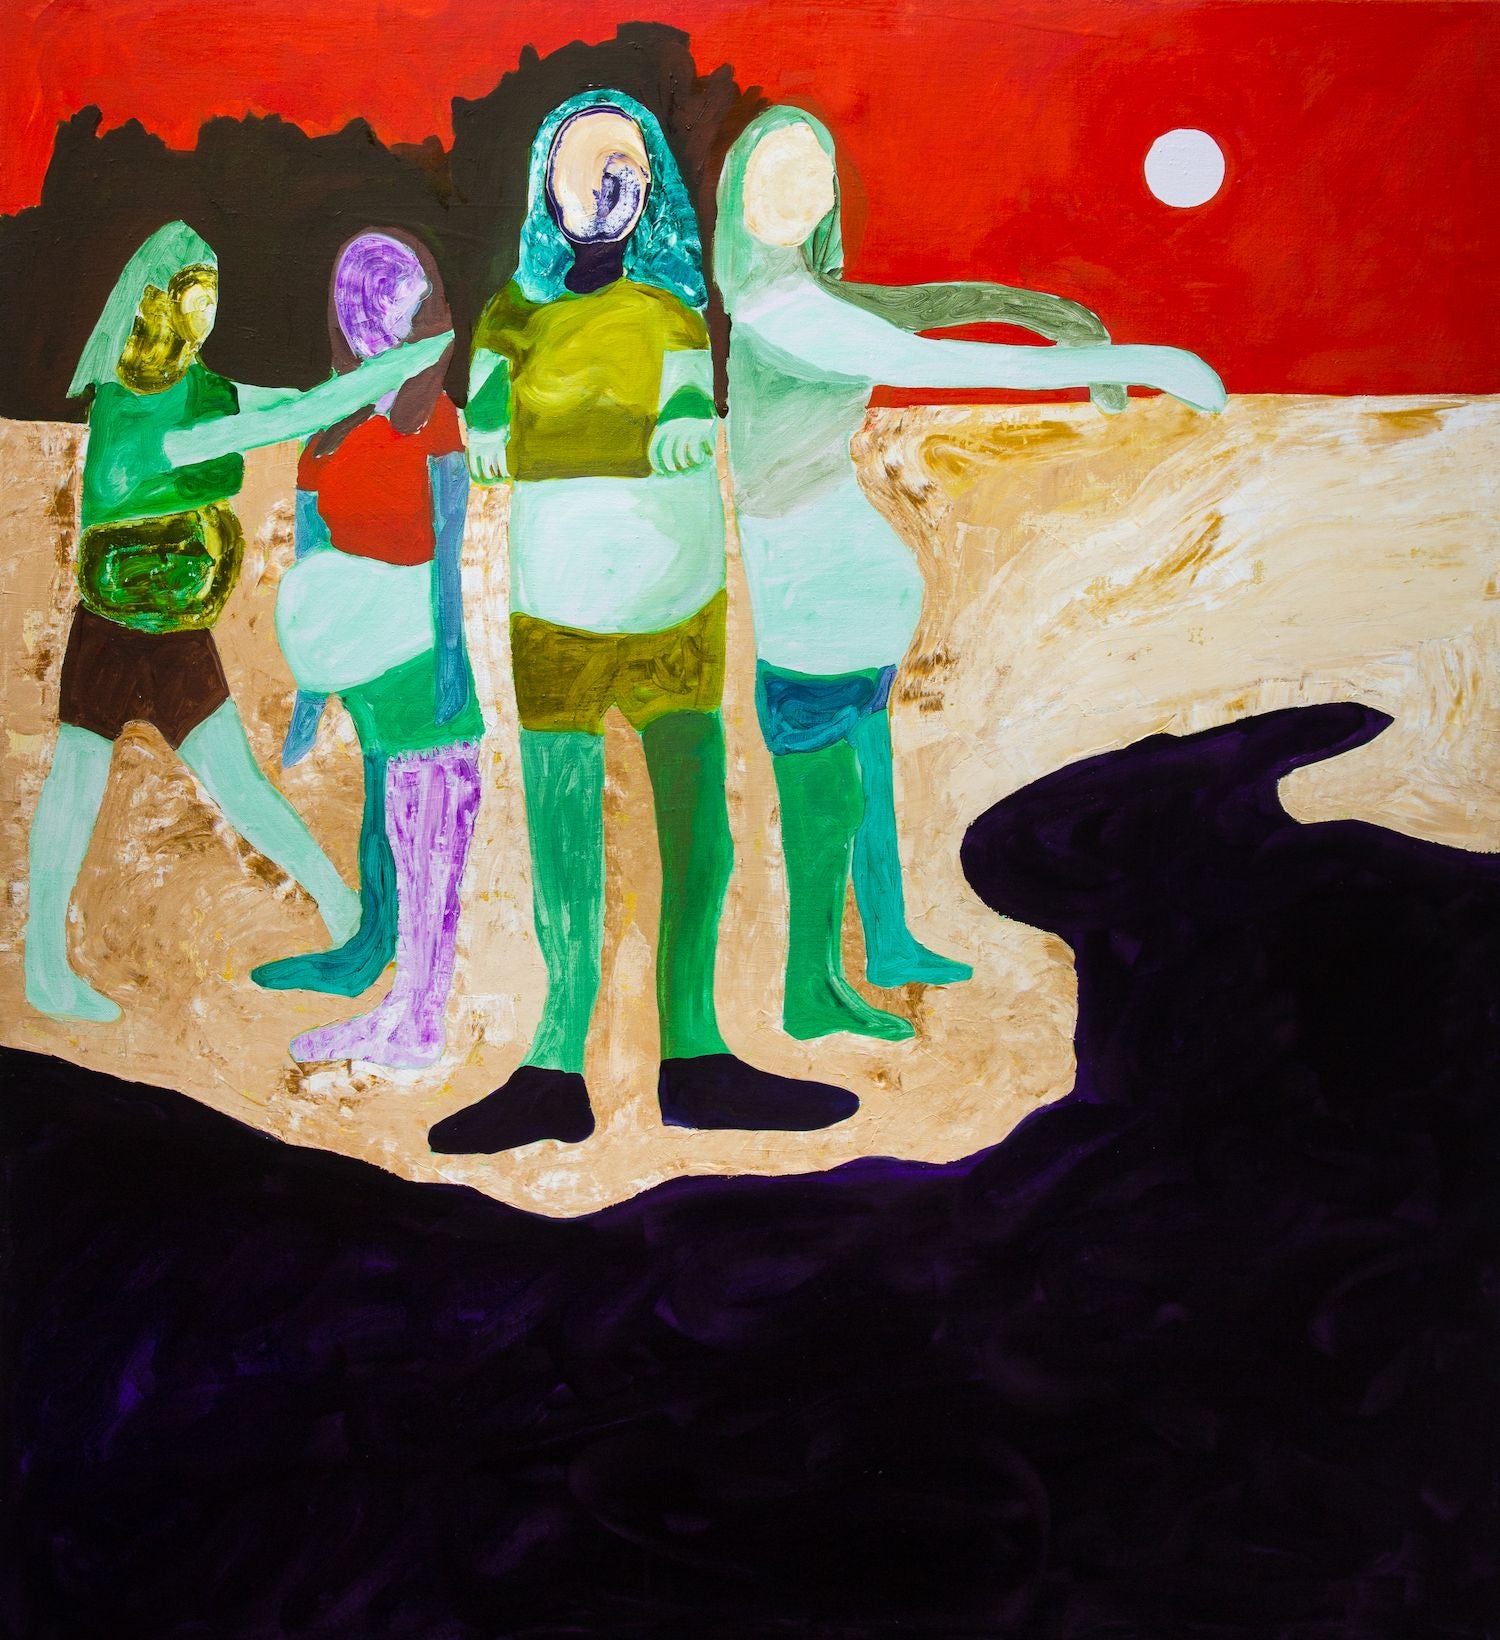 Jessica Parker Foley, "Girls by the Lake"